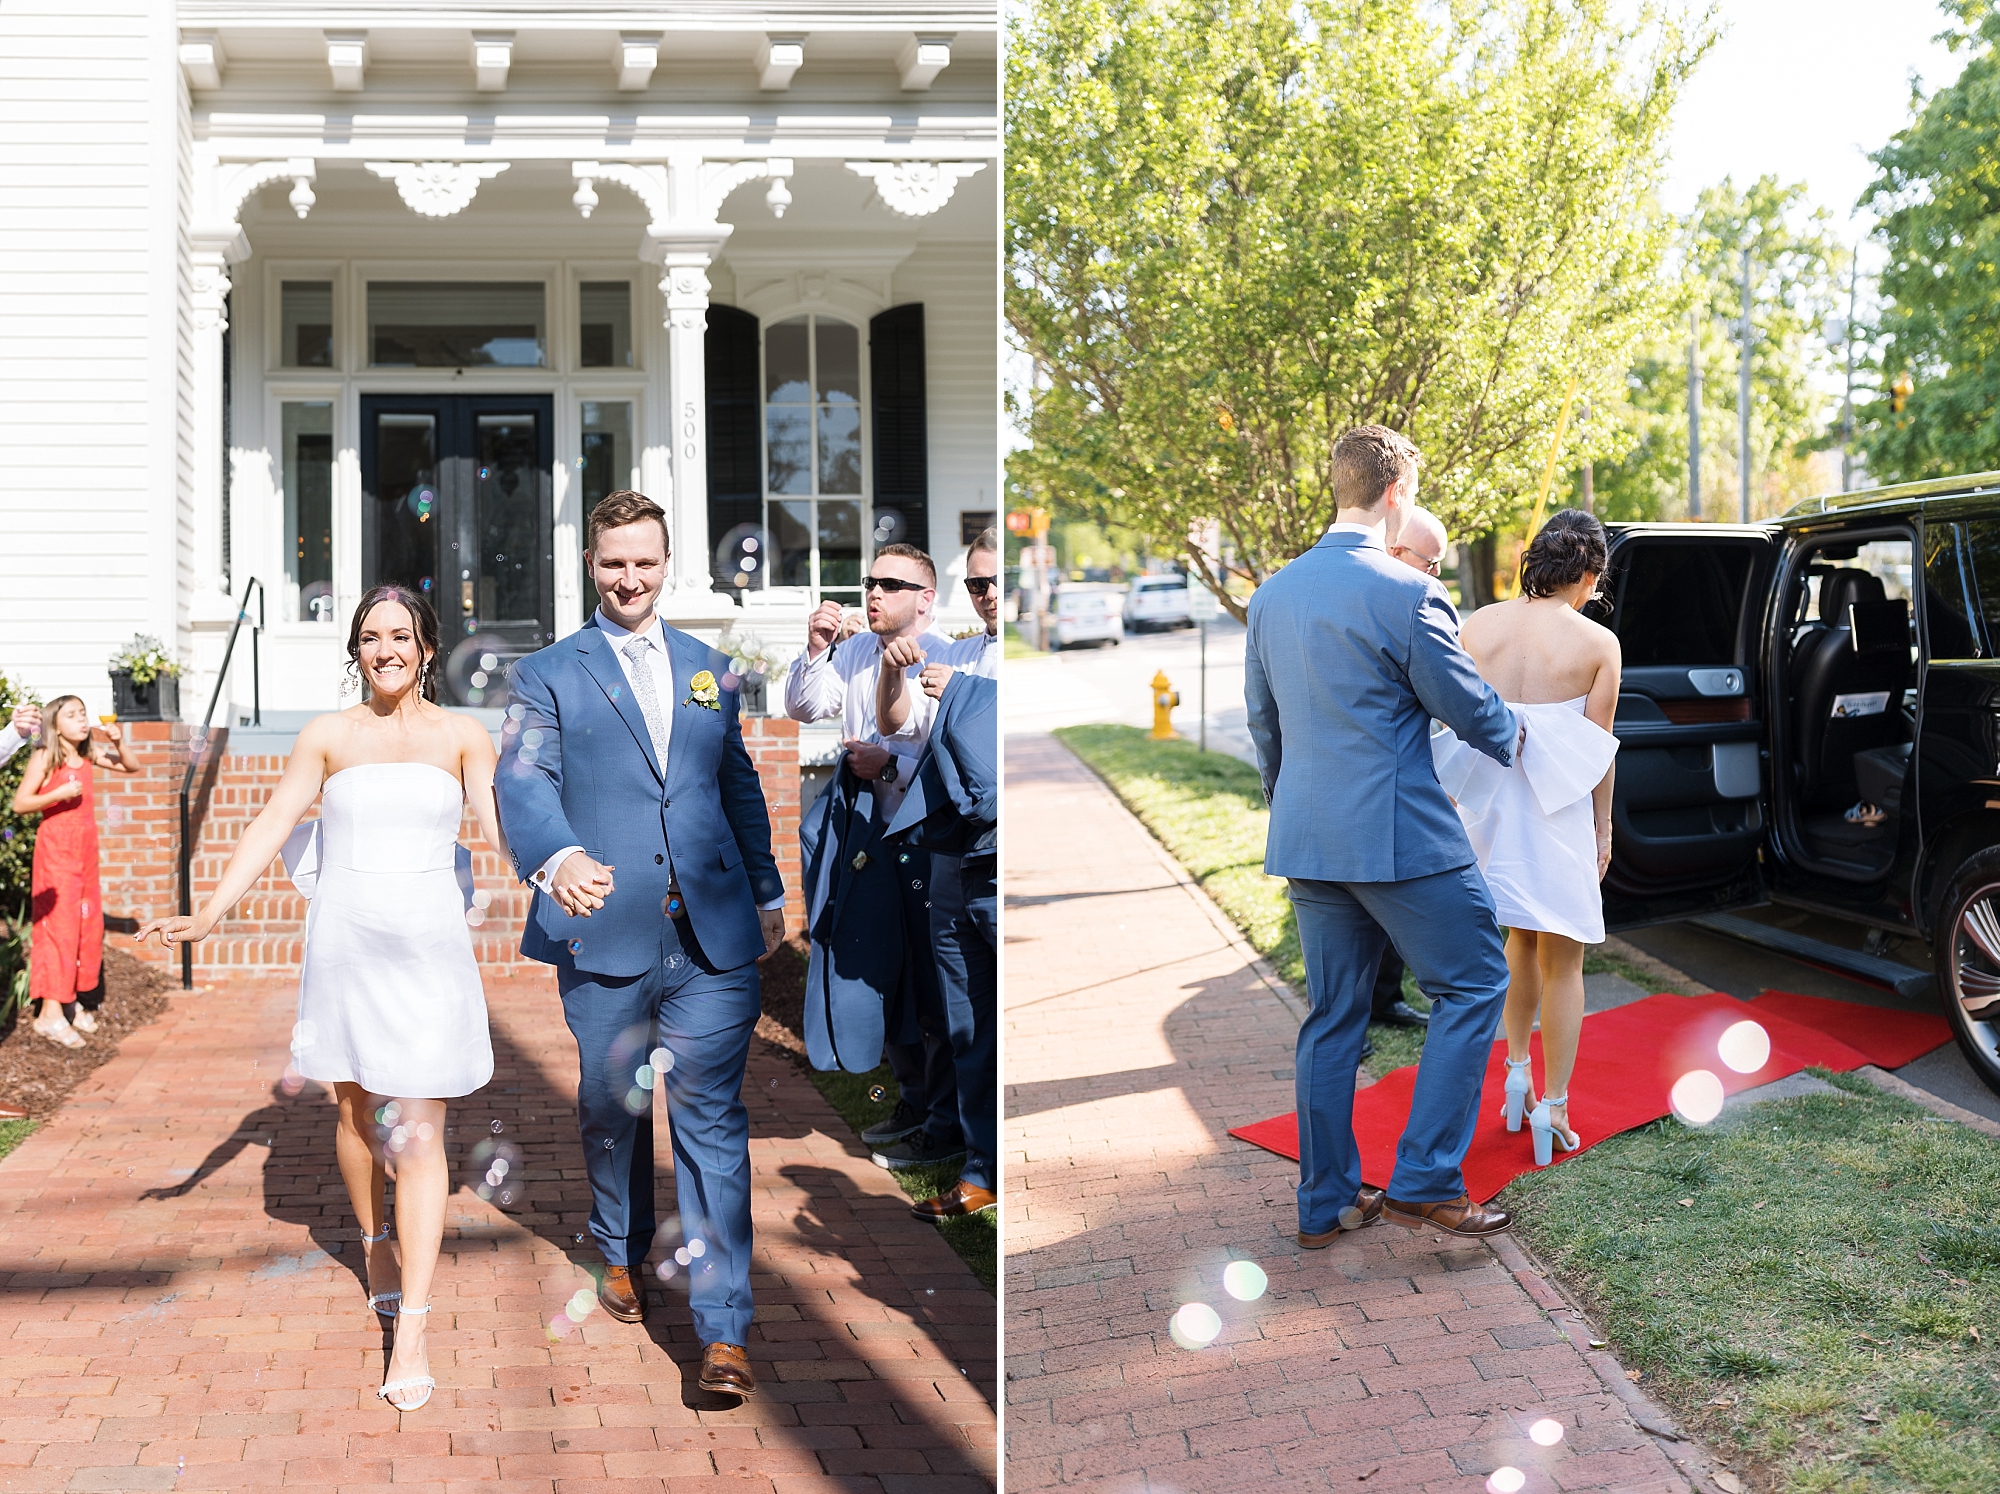 Wedding exit with red carpet  | Raleigh NC Wedding Photographer